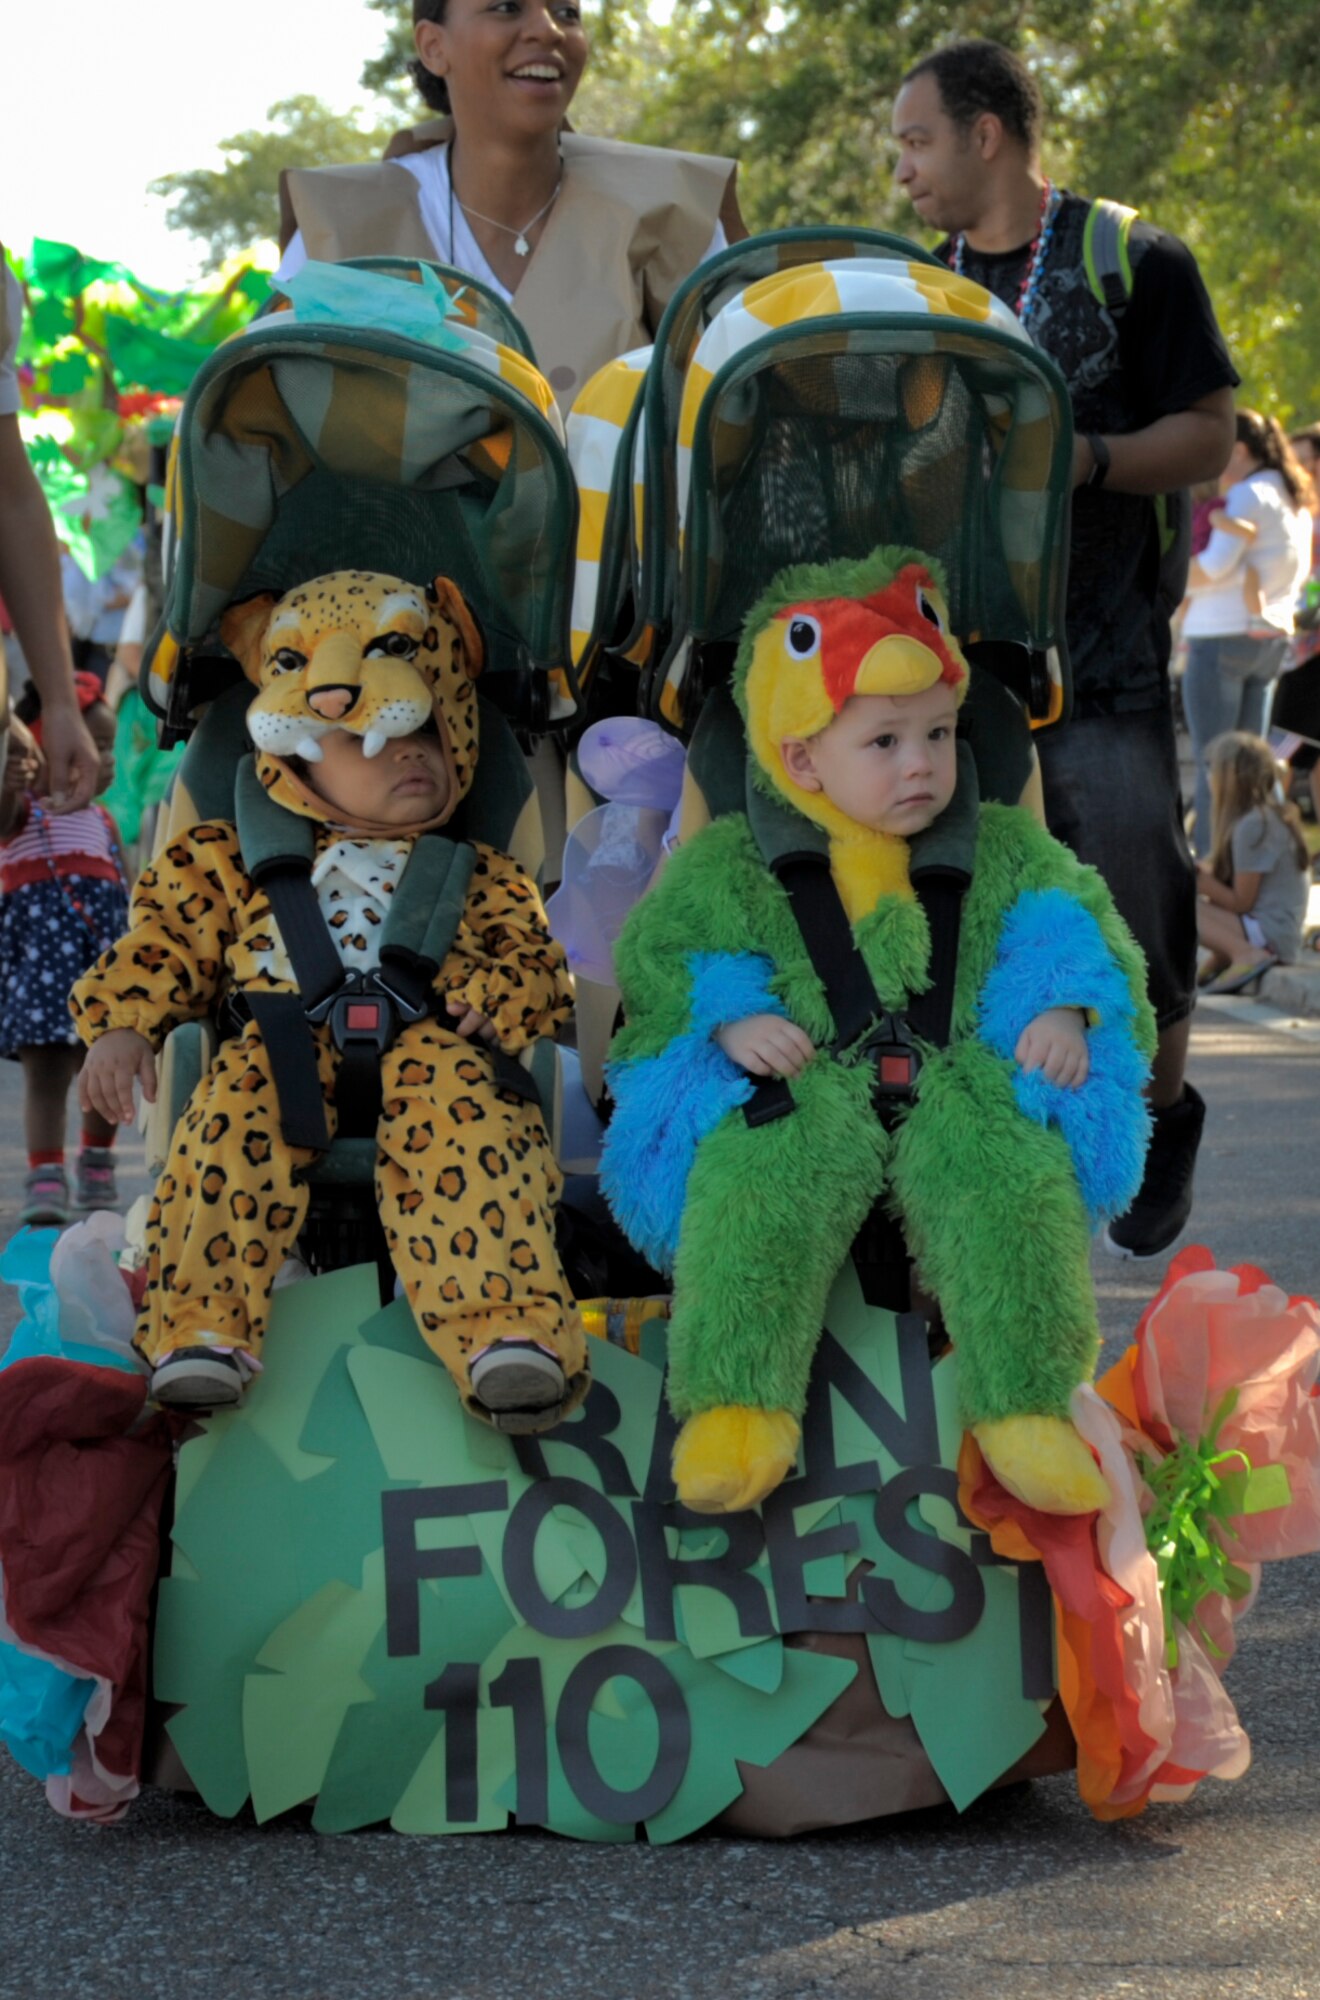 Children from the MacDill Child Development Center participate in the Month of the Military Child parade at MacDill Air Force Base, Fla., April 21, 2017. April is Month of the Military Child and throughout the month MacDill has hosted various events in celebration including a parade and numerous events at the schools. (U.S. Air Force photo by Airman 1st Class Mariette Adams)